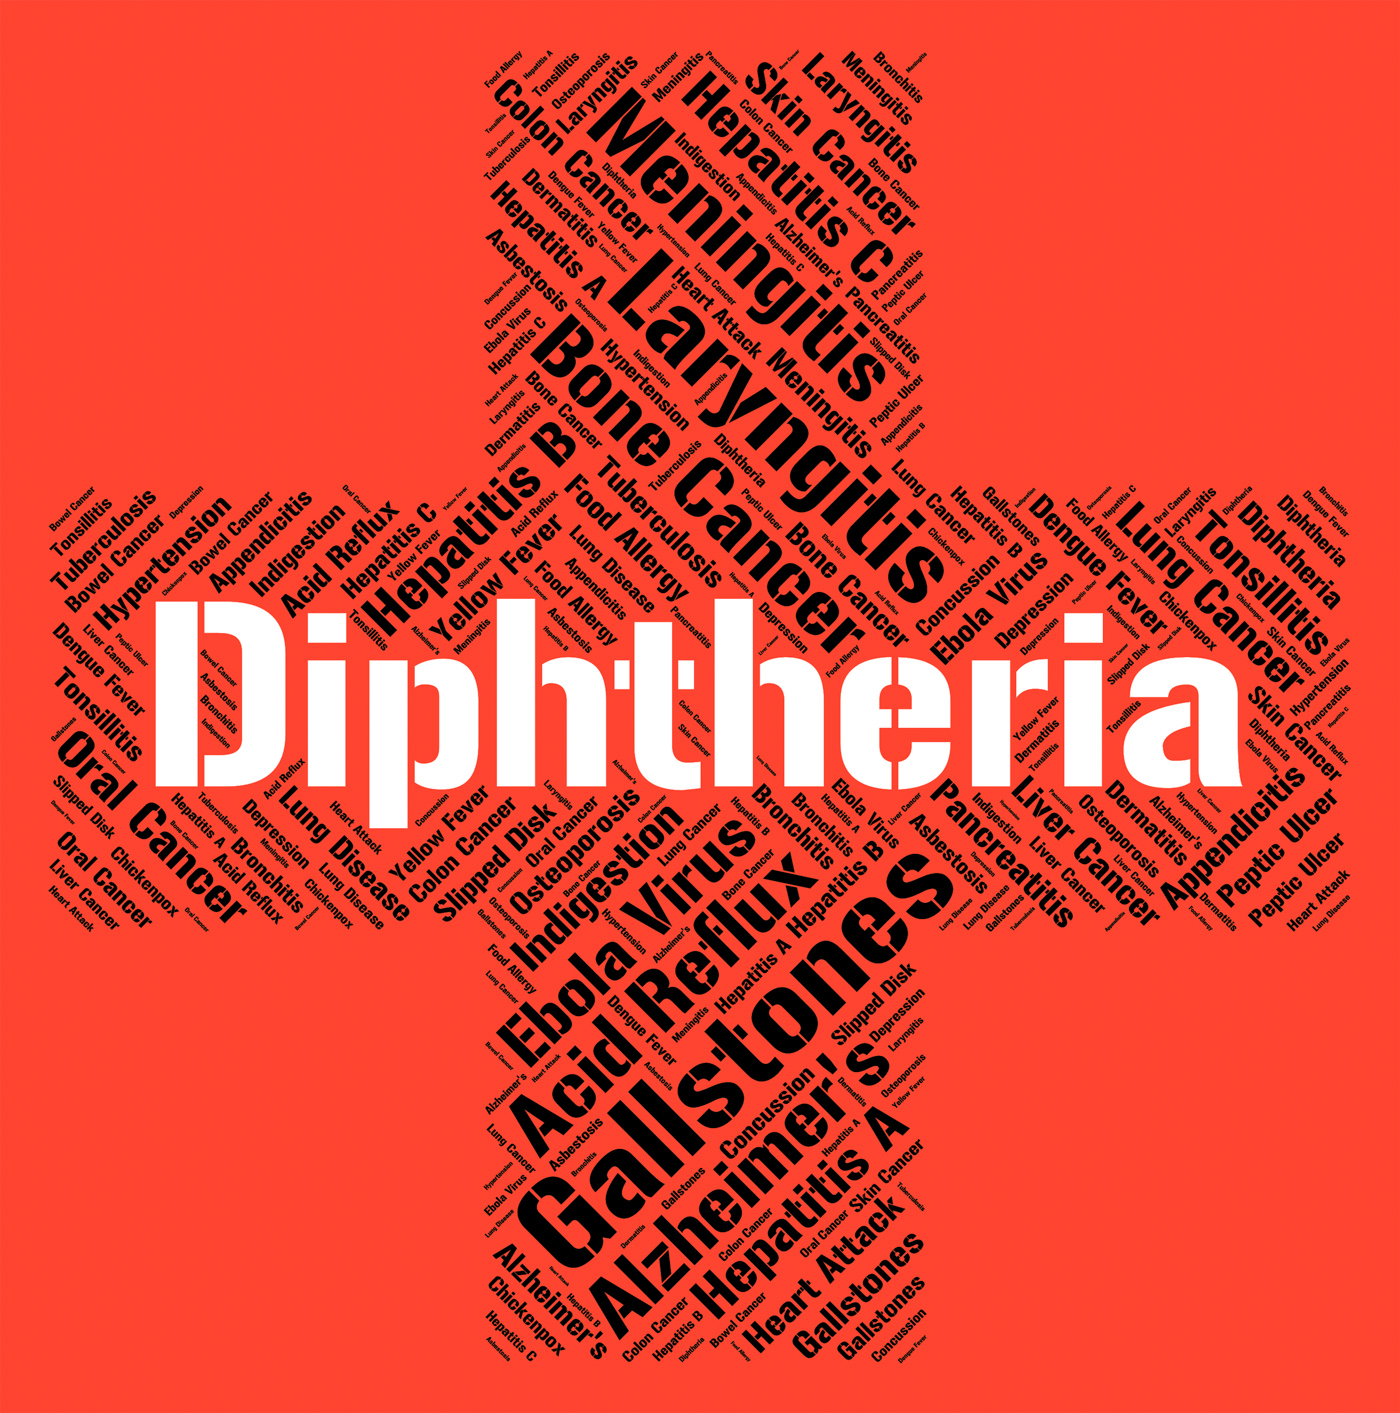 Diphtheria word means corynebacterium diphtheriae and affliction photo